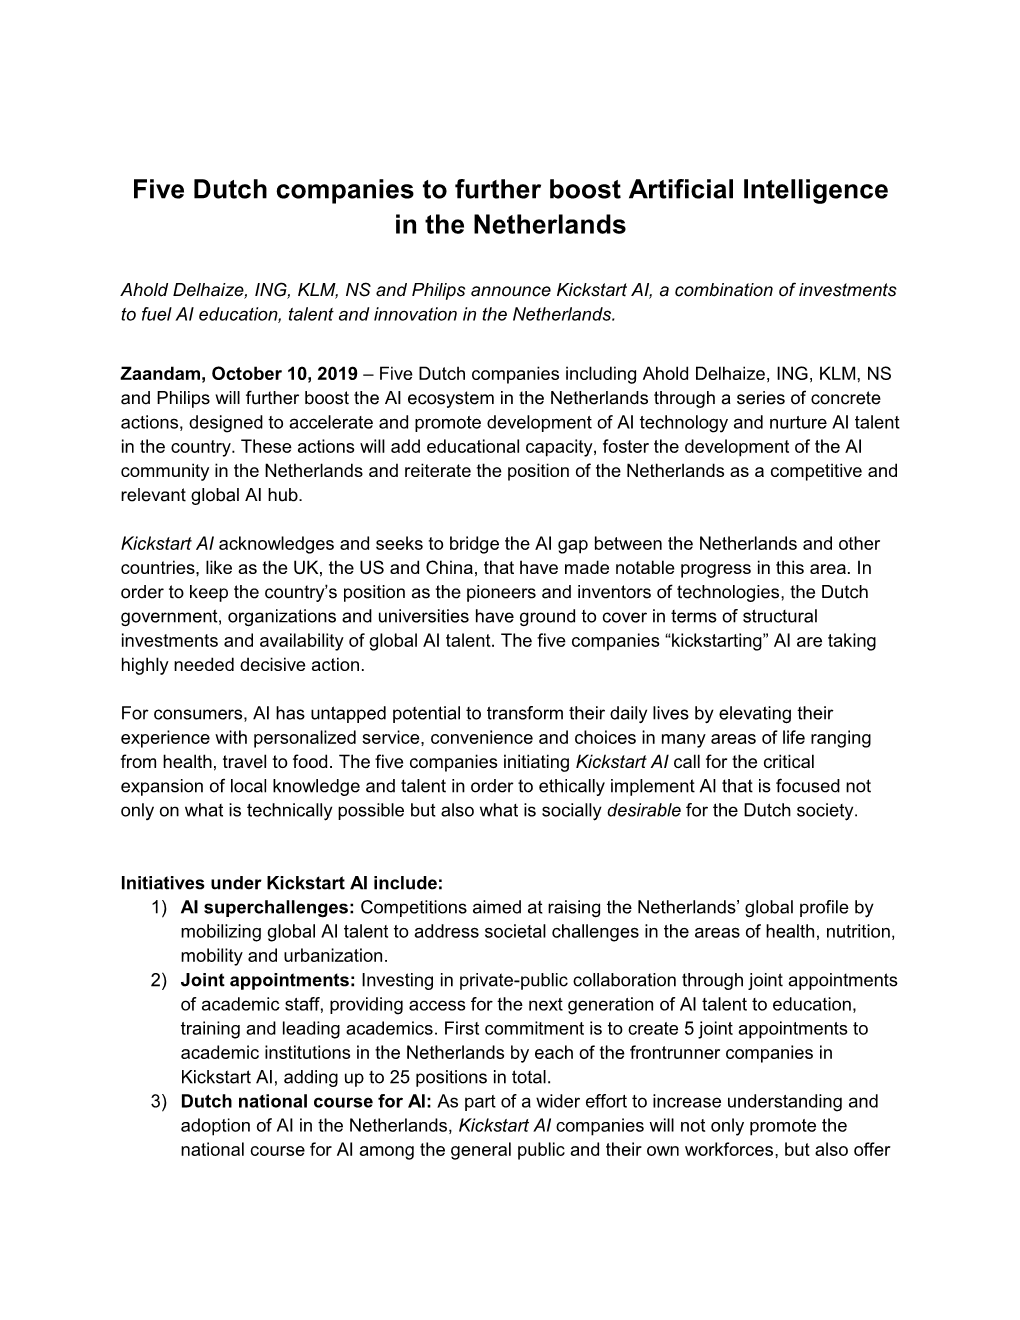 Five Dutch Companies to Further Boost Artificial Intelligence in the Netherlands